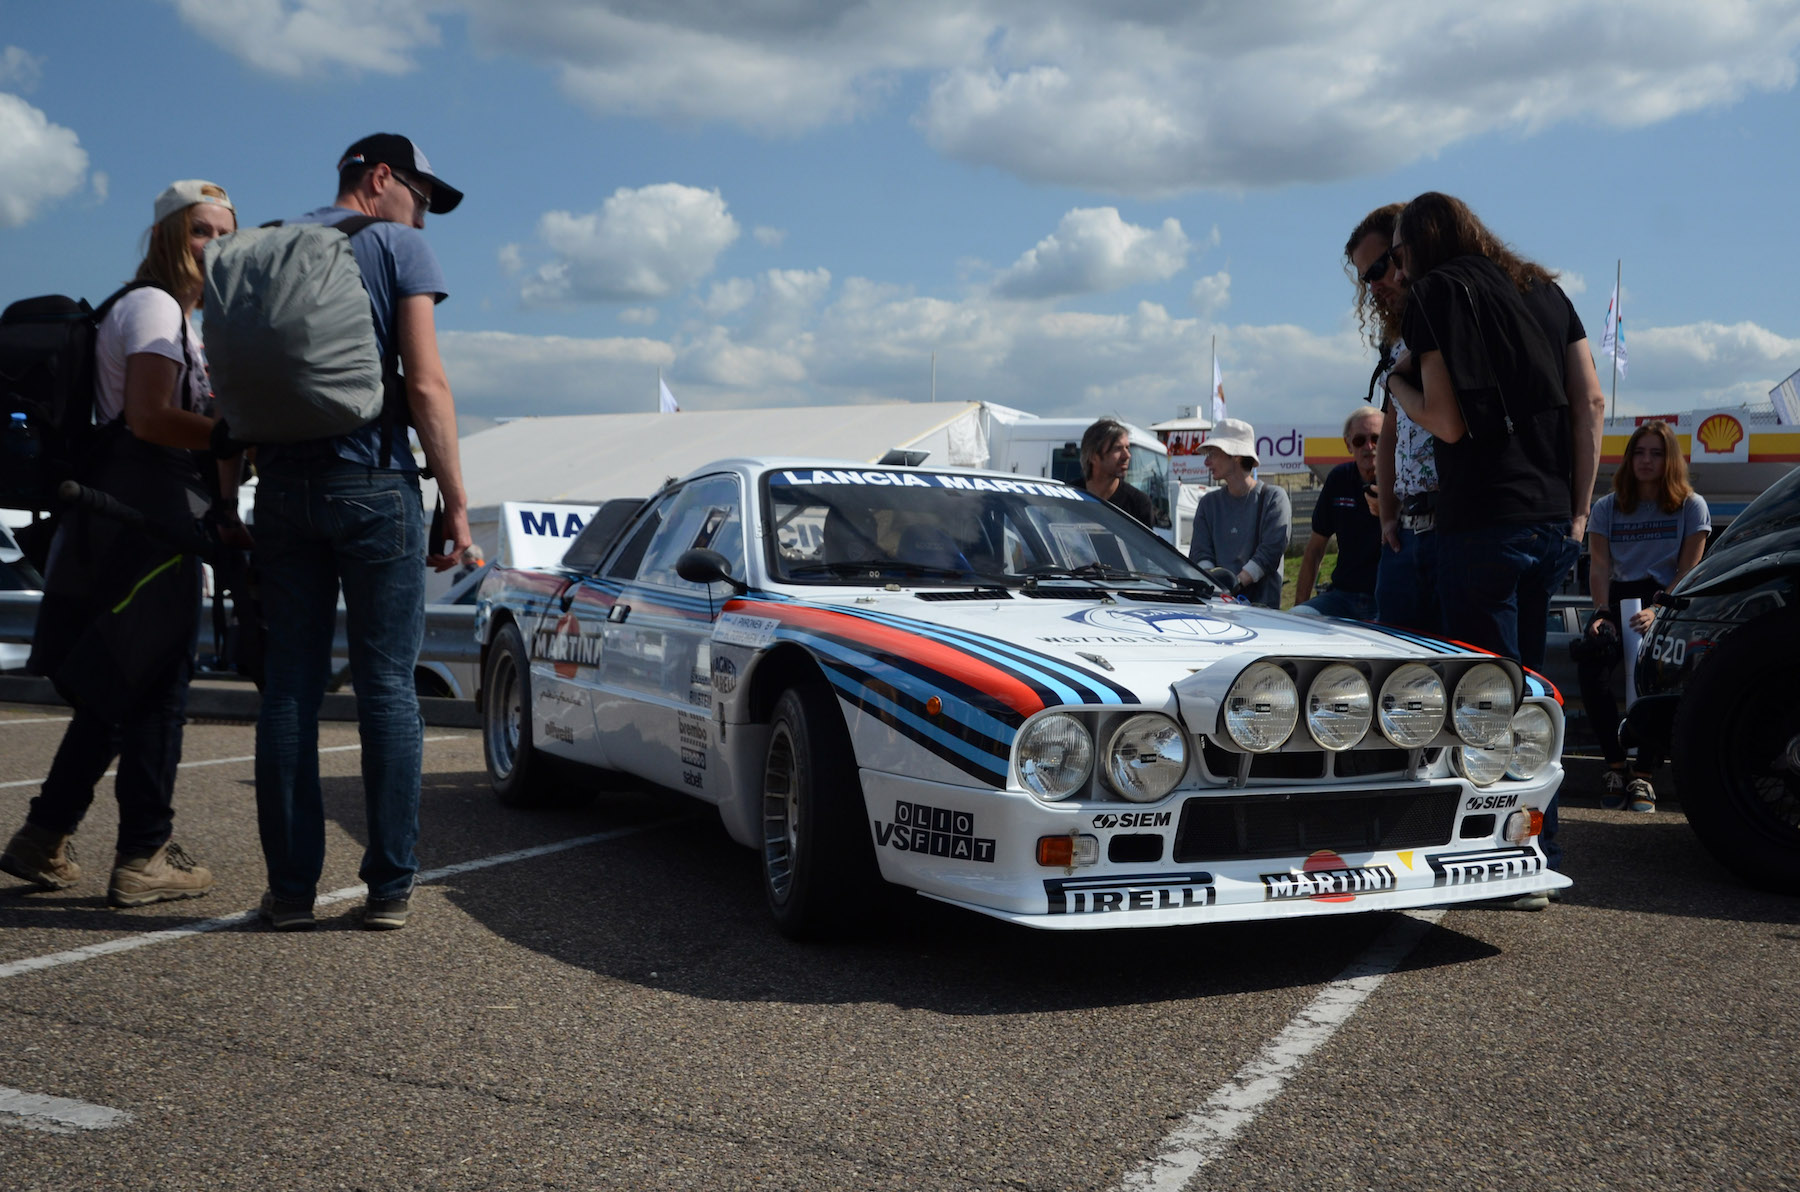 lancia-037-was-extremely-popular-with-the-crowd.jpg